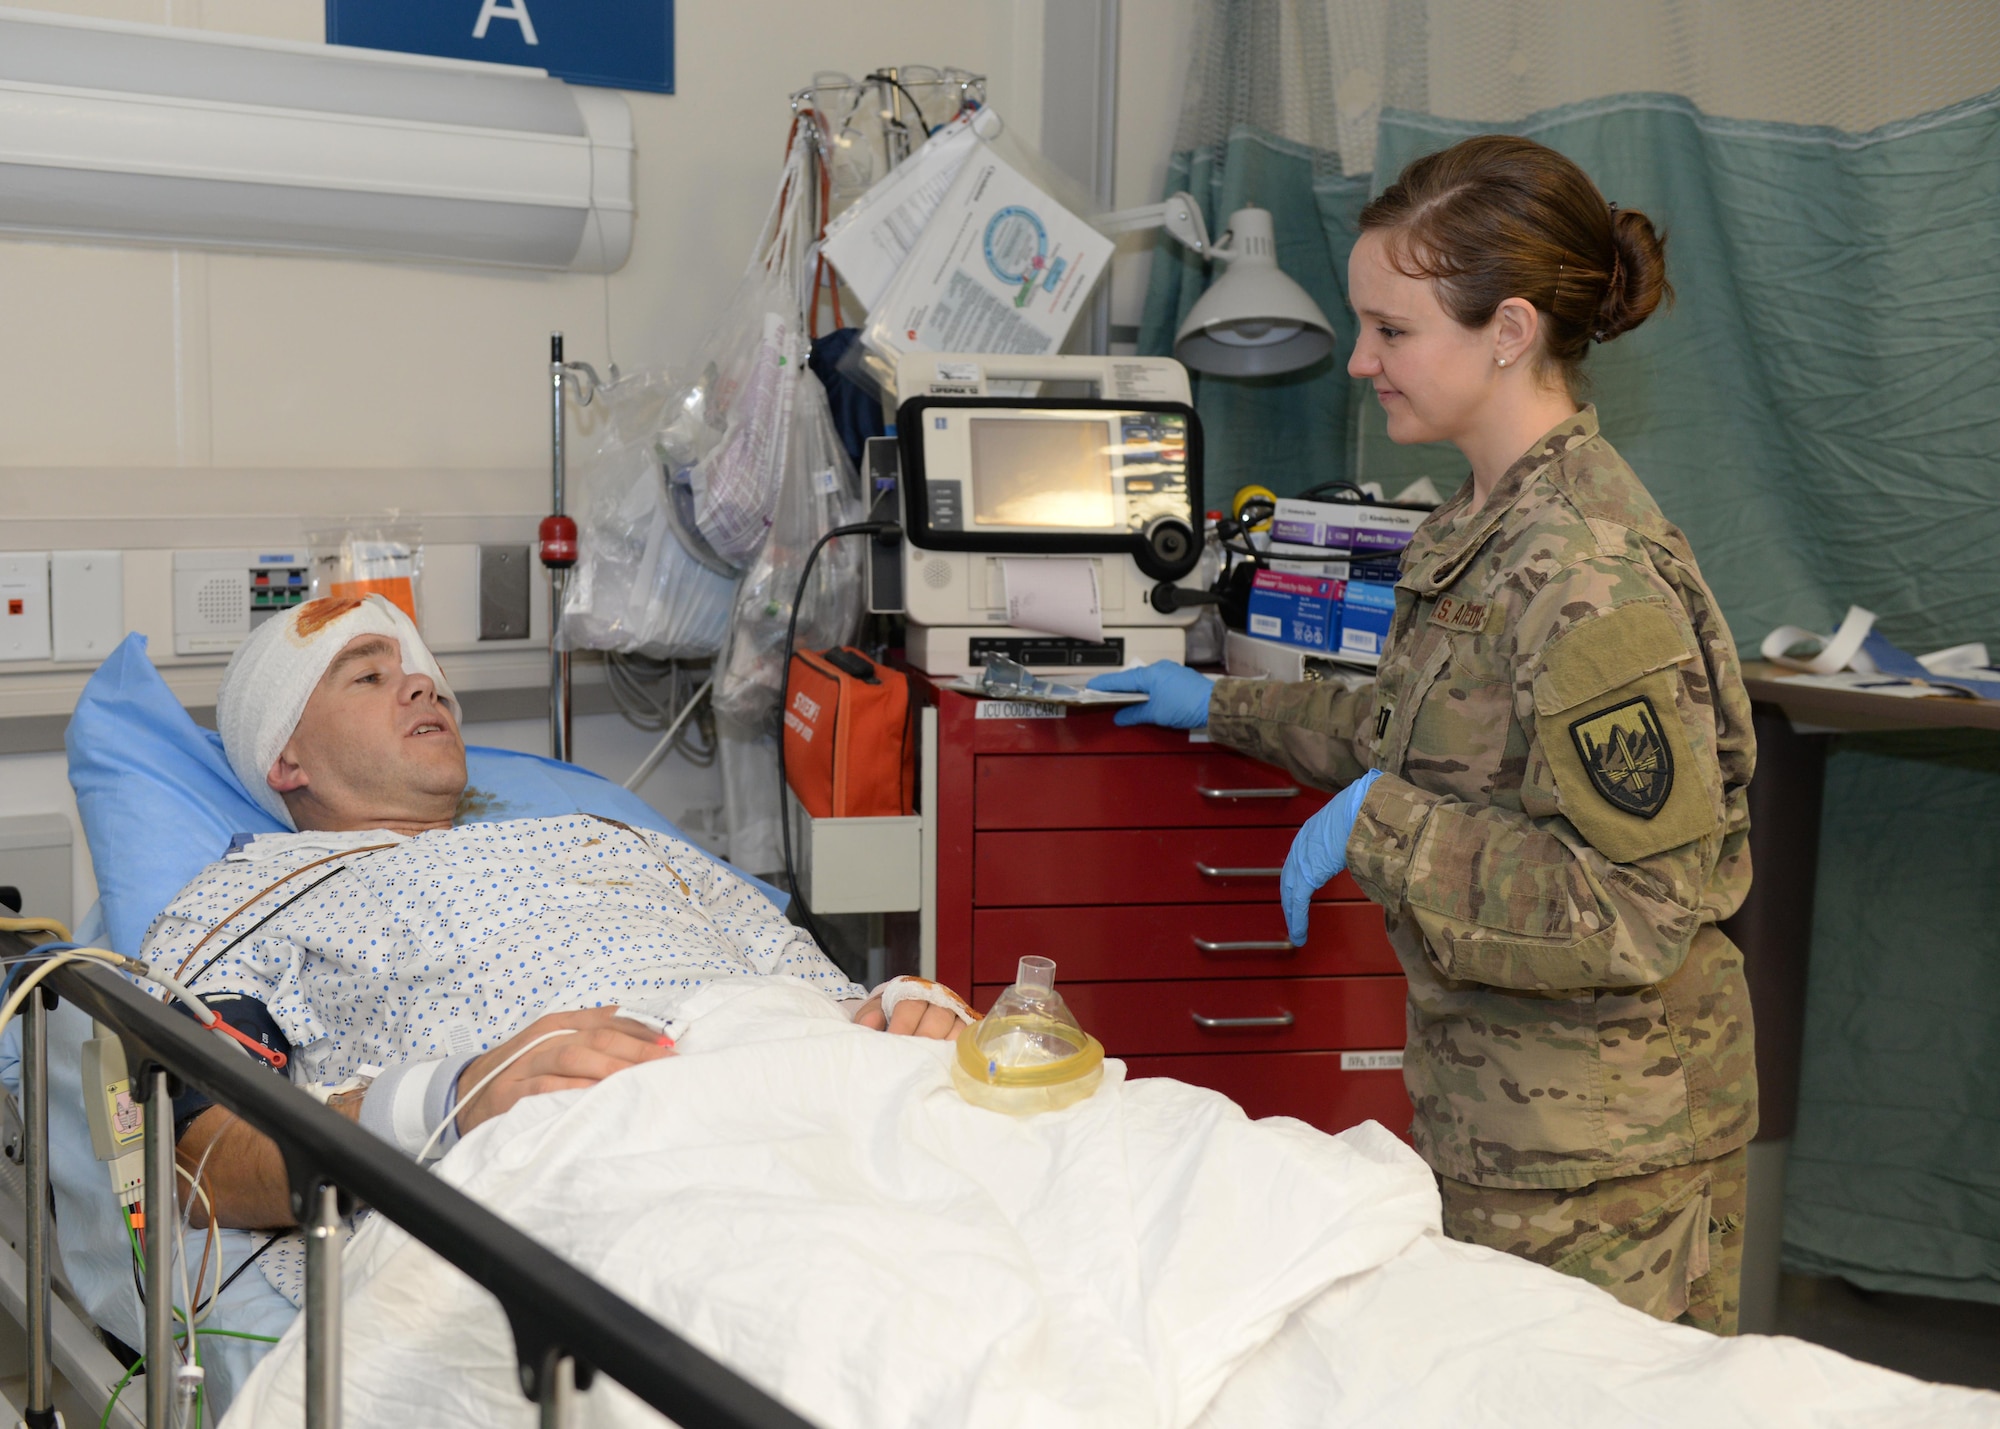 U.S. Air Force Capt. Mavis Bean, 455th Expeditionary Medical Operations Squadron clinical care nurse, talks with a volunteer training patient June 11, 2015, at Bagram Airfield, Afghanistan. Bean works in the intensive care unit at Afghanistan’s most advanced medical facility, the Craig Joint Theater Hospital, and is responsible for treating trauma patients. (U.S. Air Force photo by Senior Airmen Cierra Presentado/Released)